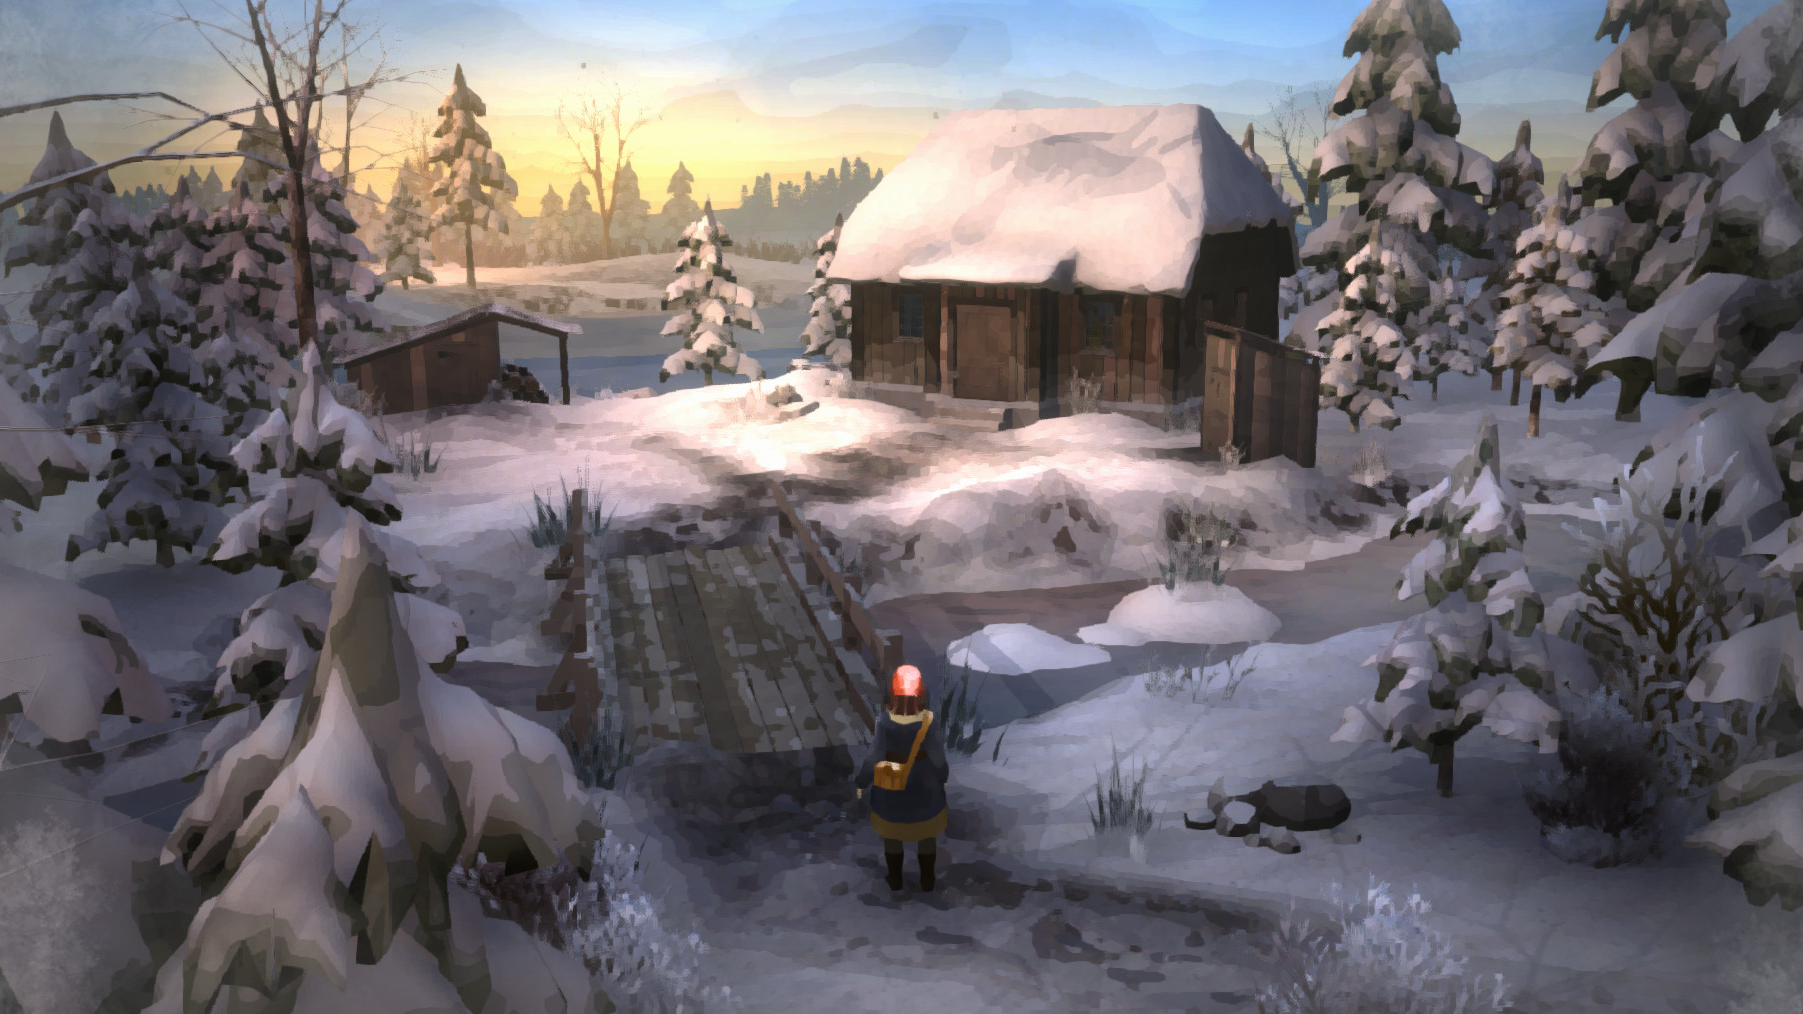 The WWII adventure Gerda: A Flame in Winter will be released September 1